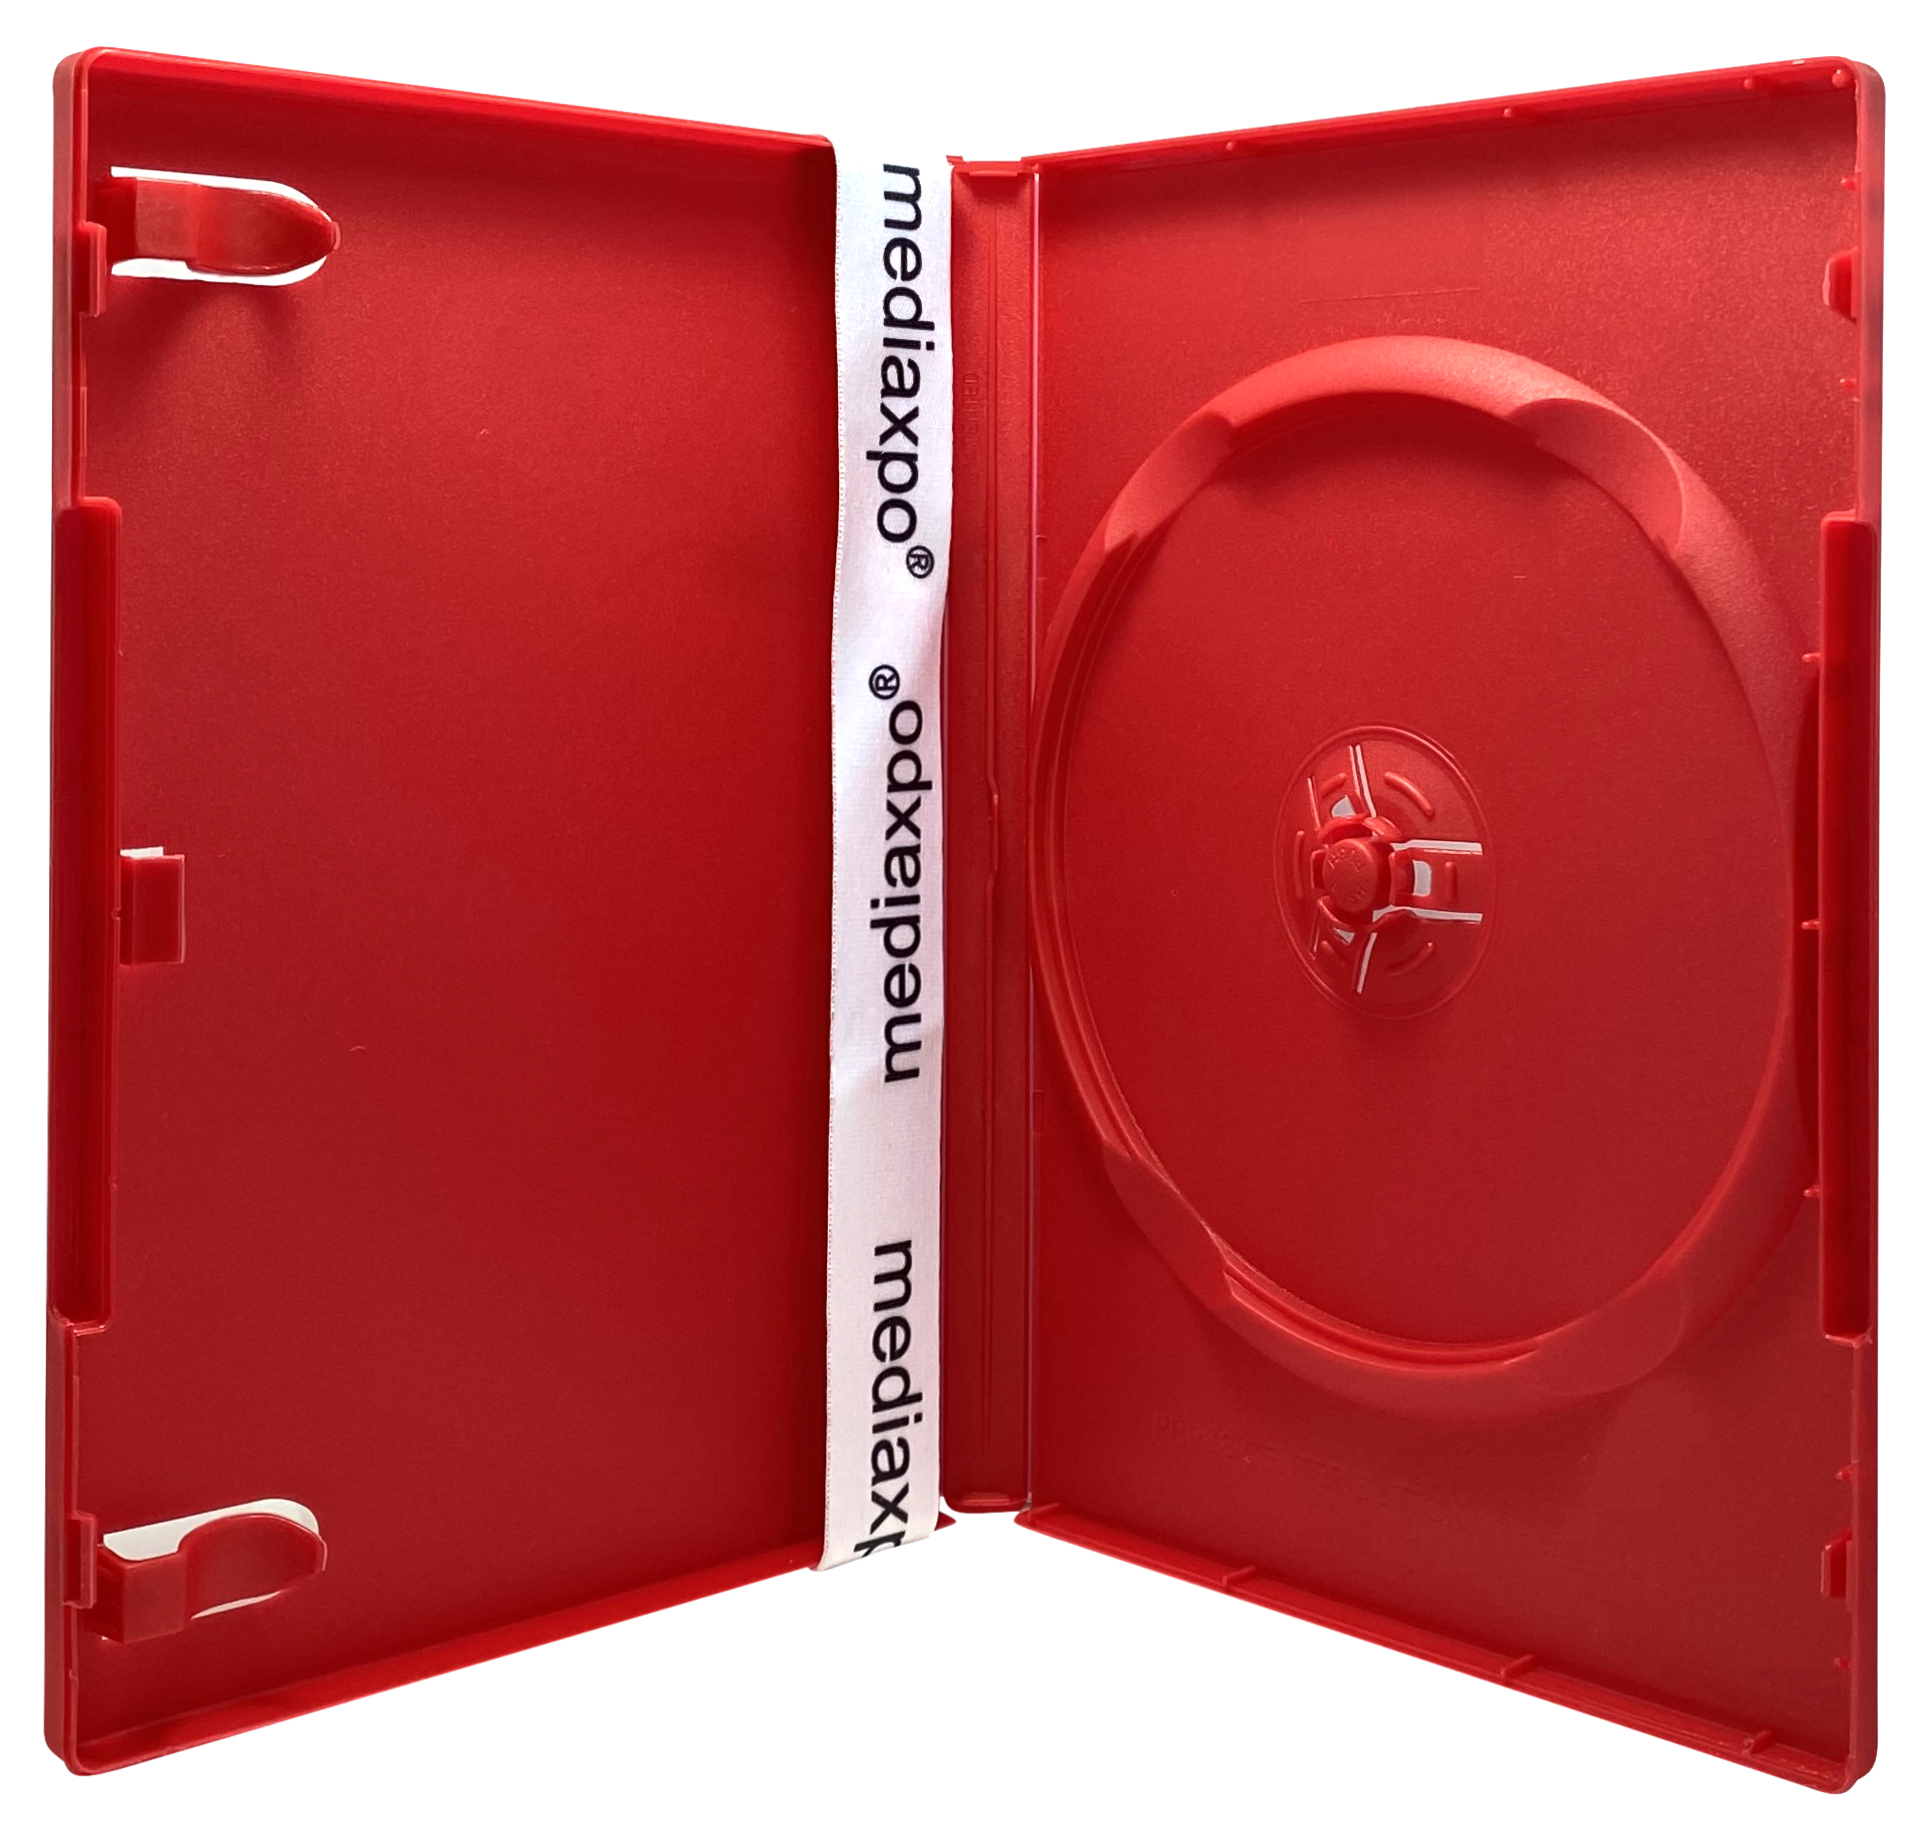 Image of ID 1214260131 100 STANDARD Solid Red Color Single DVD Cases